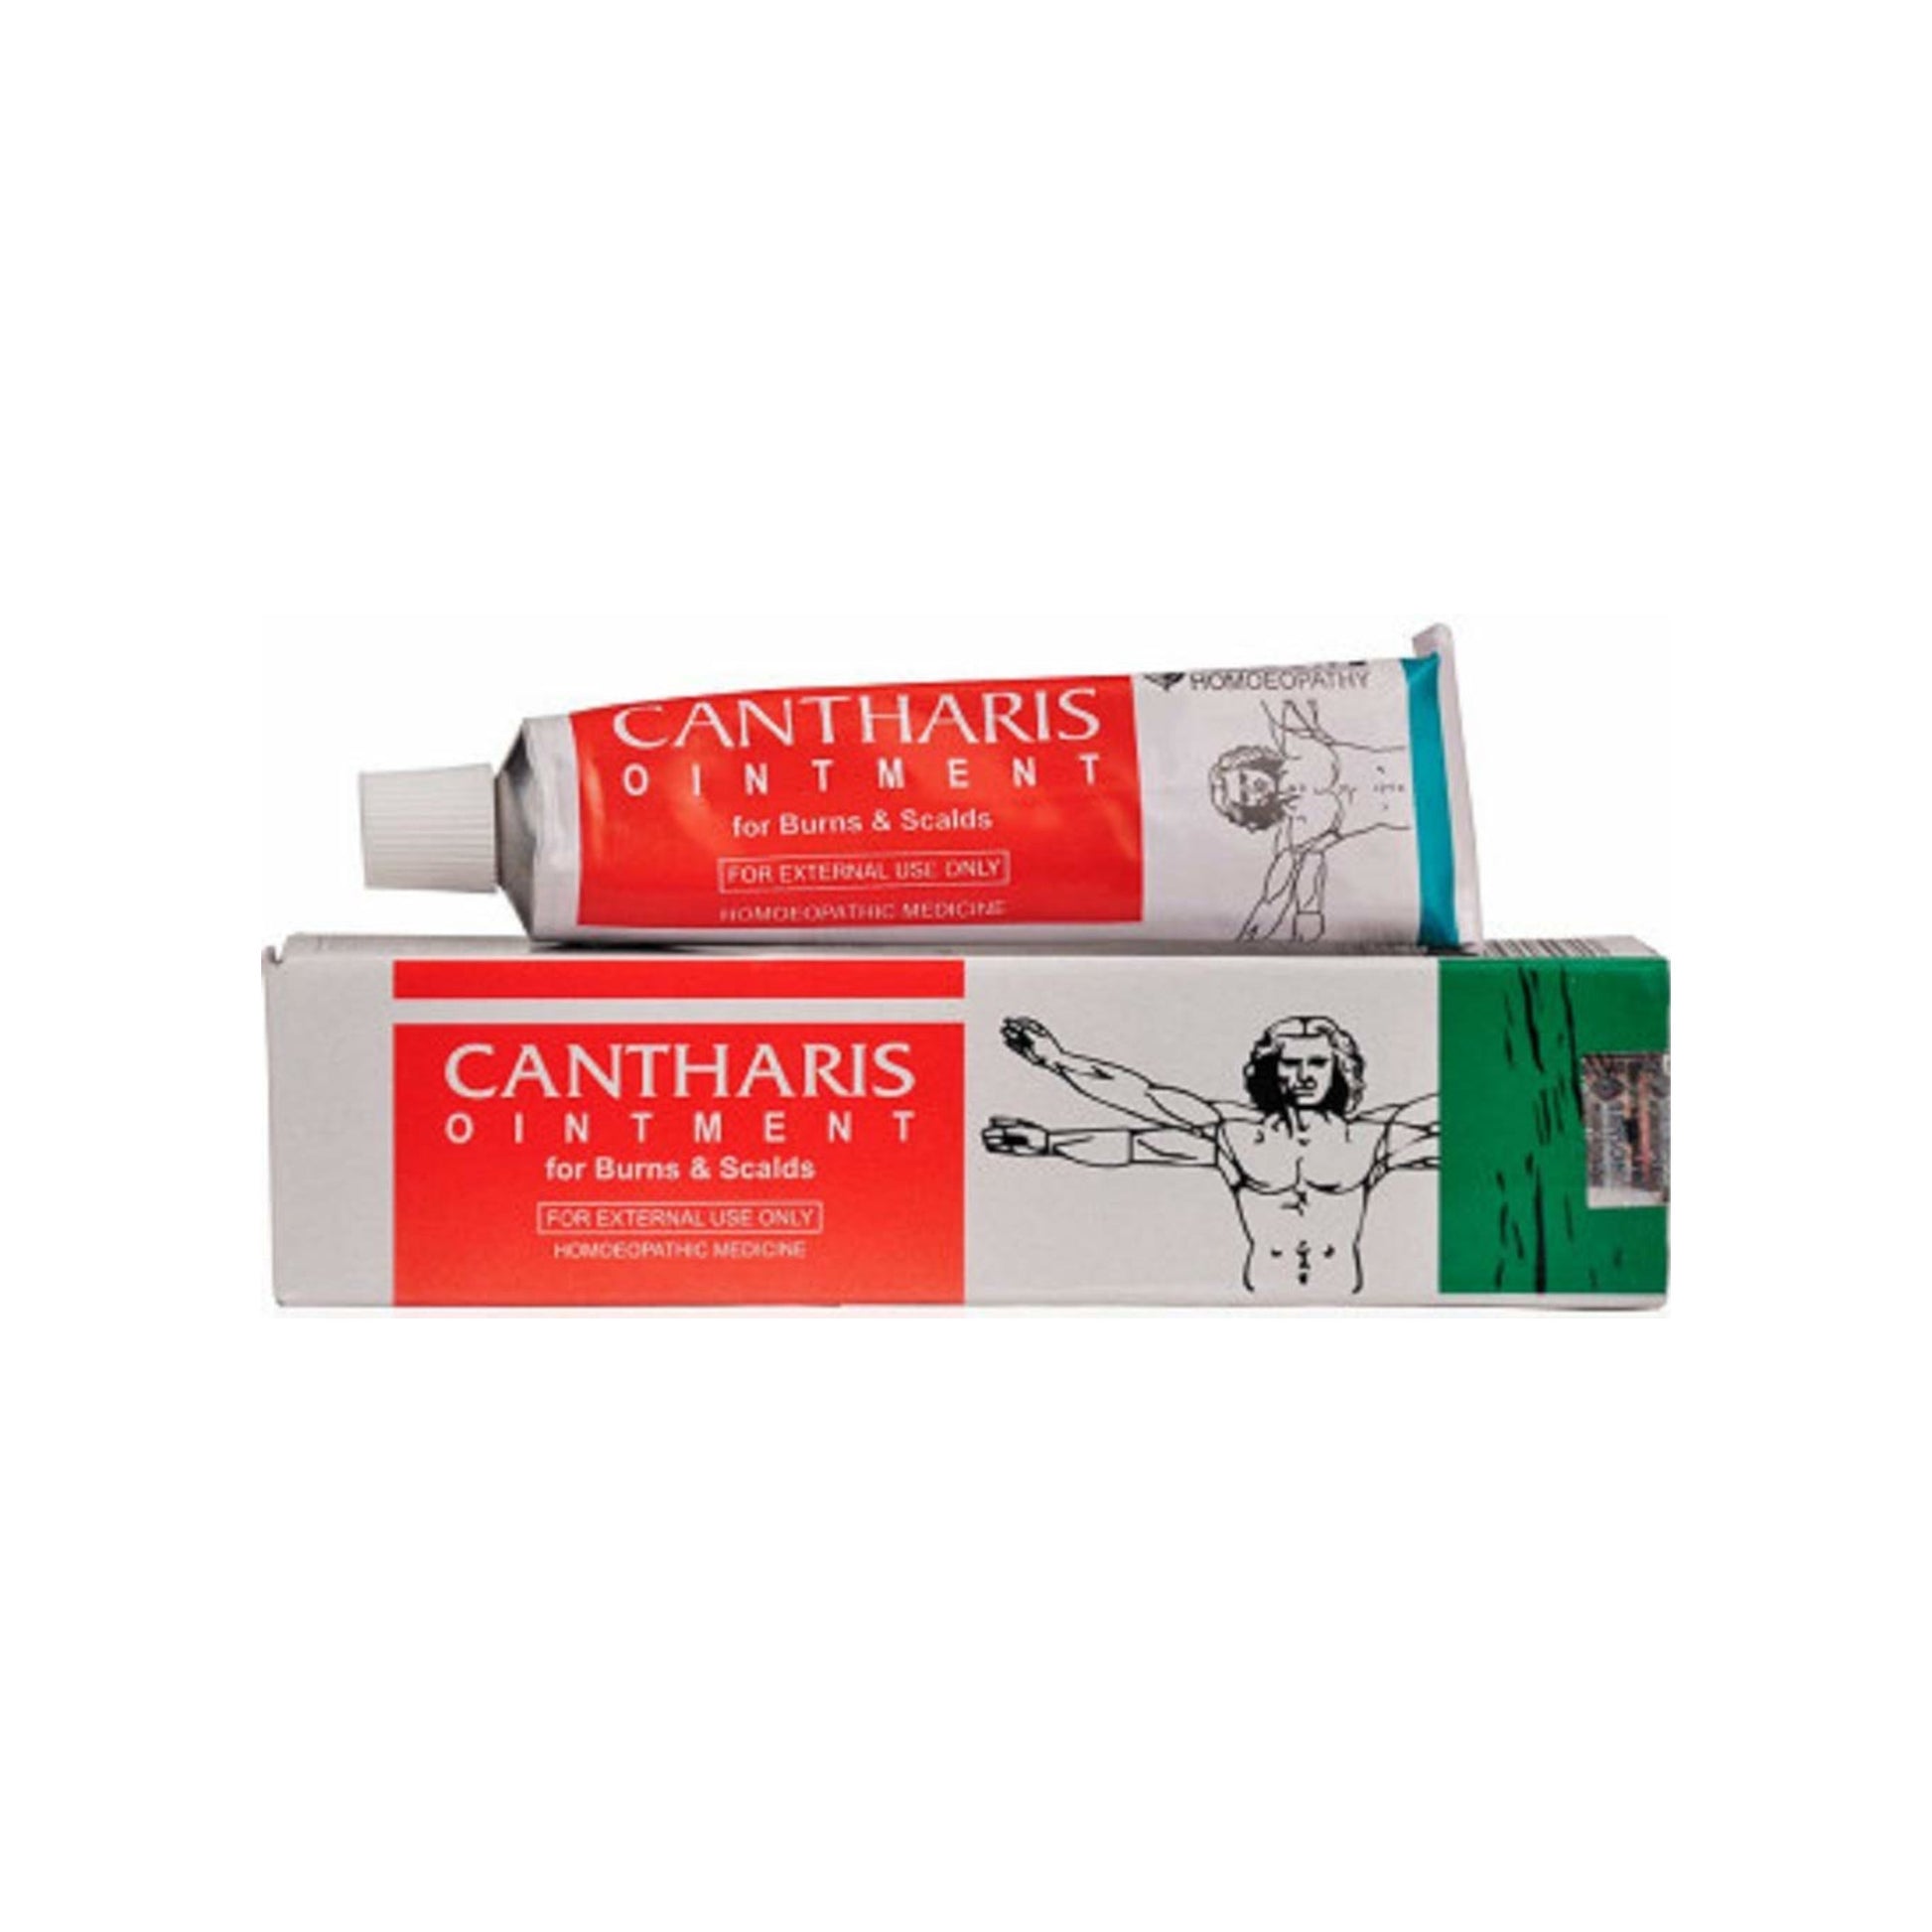 Image: Bakson's Cantharis Ointment: Relief for burns, scalds, and skin irritations.